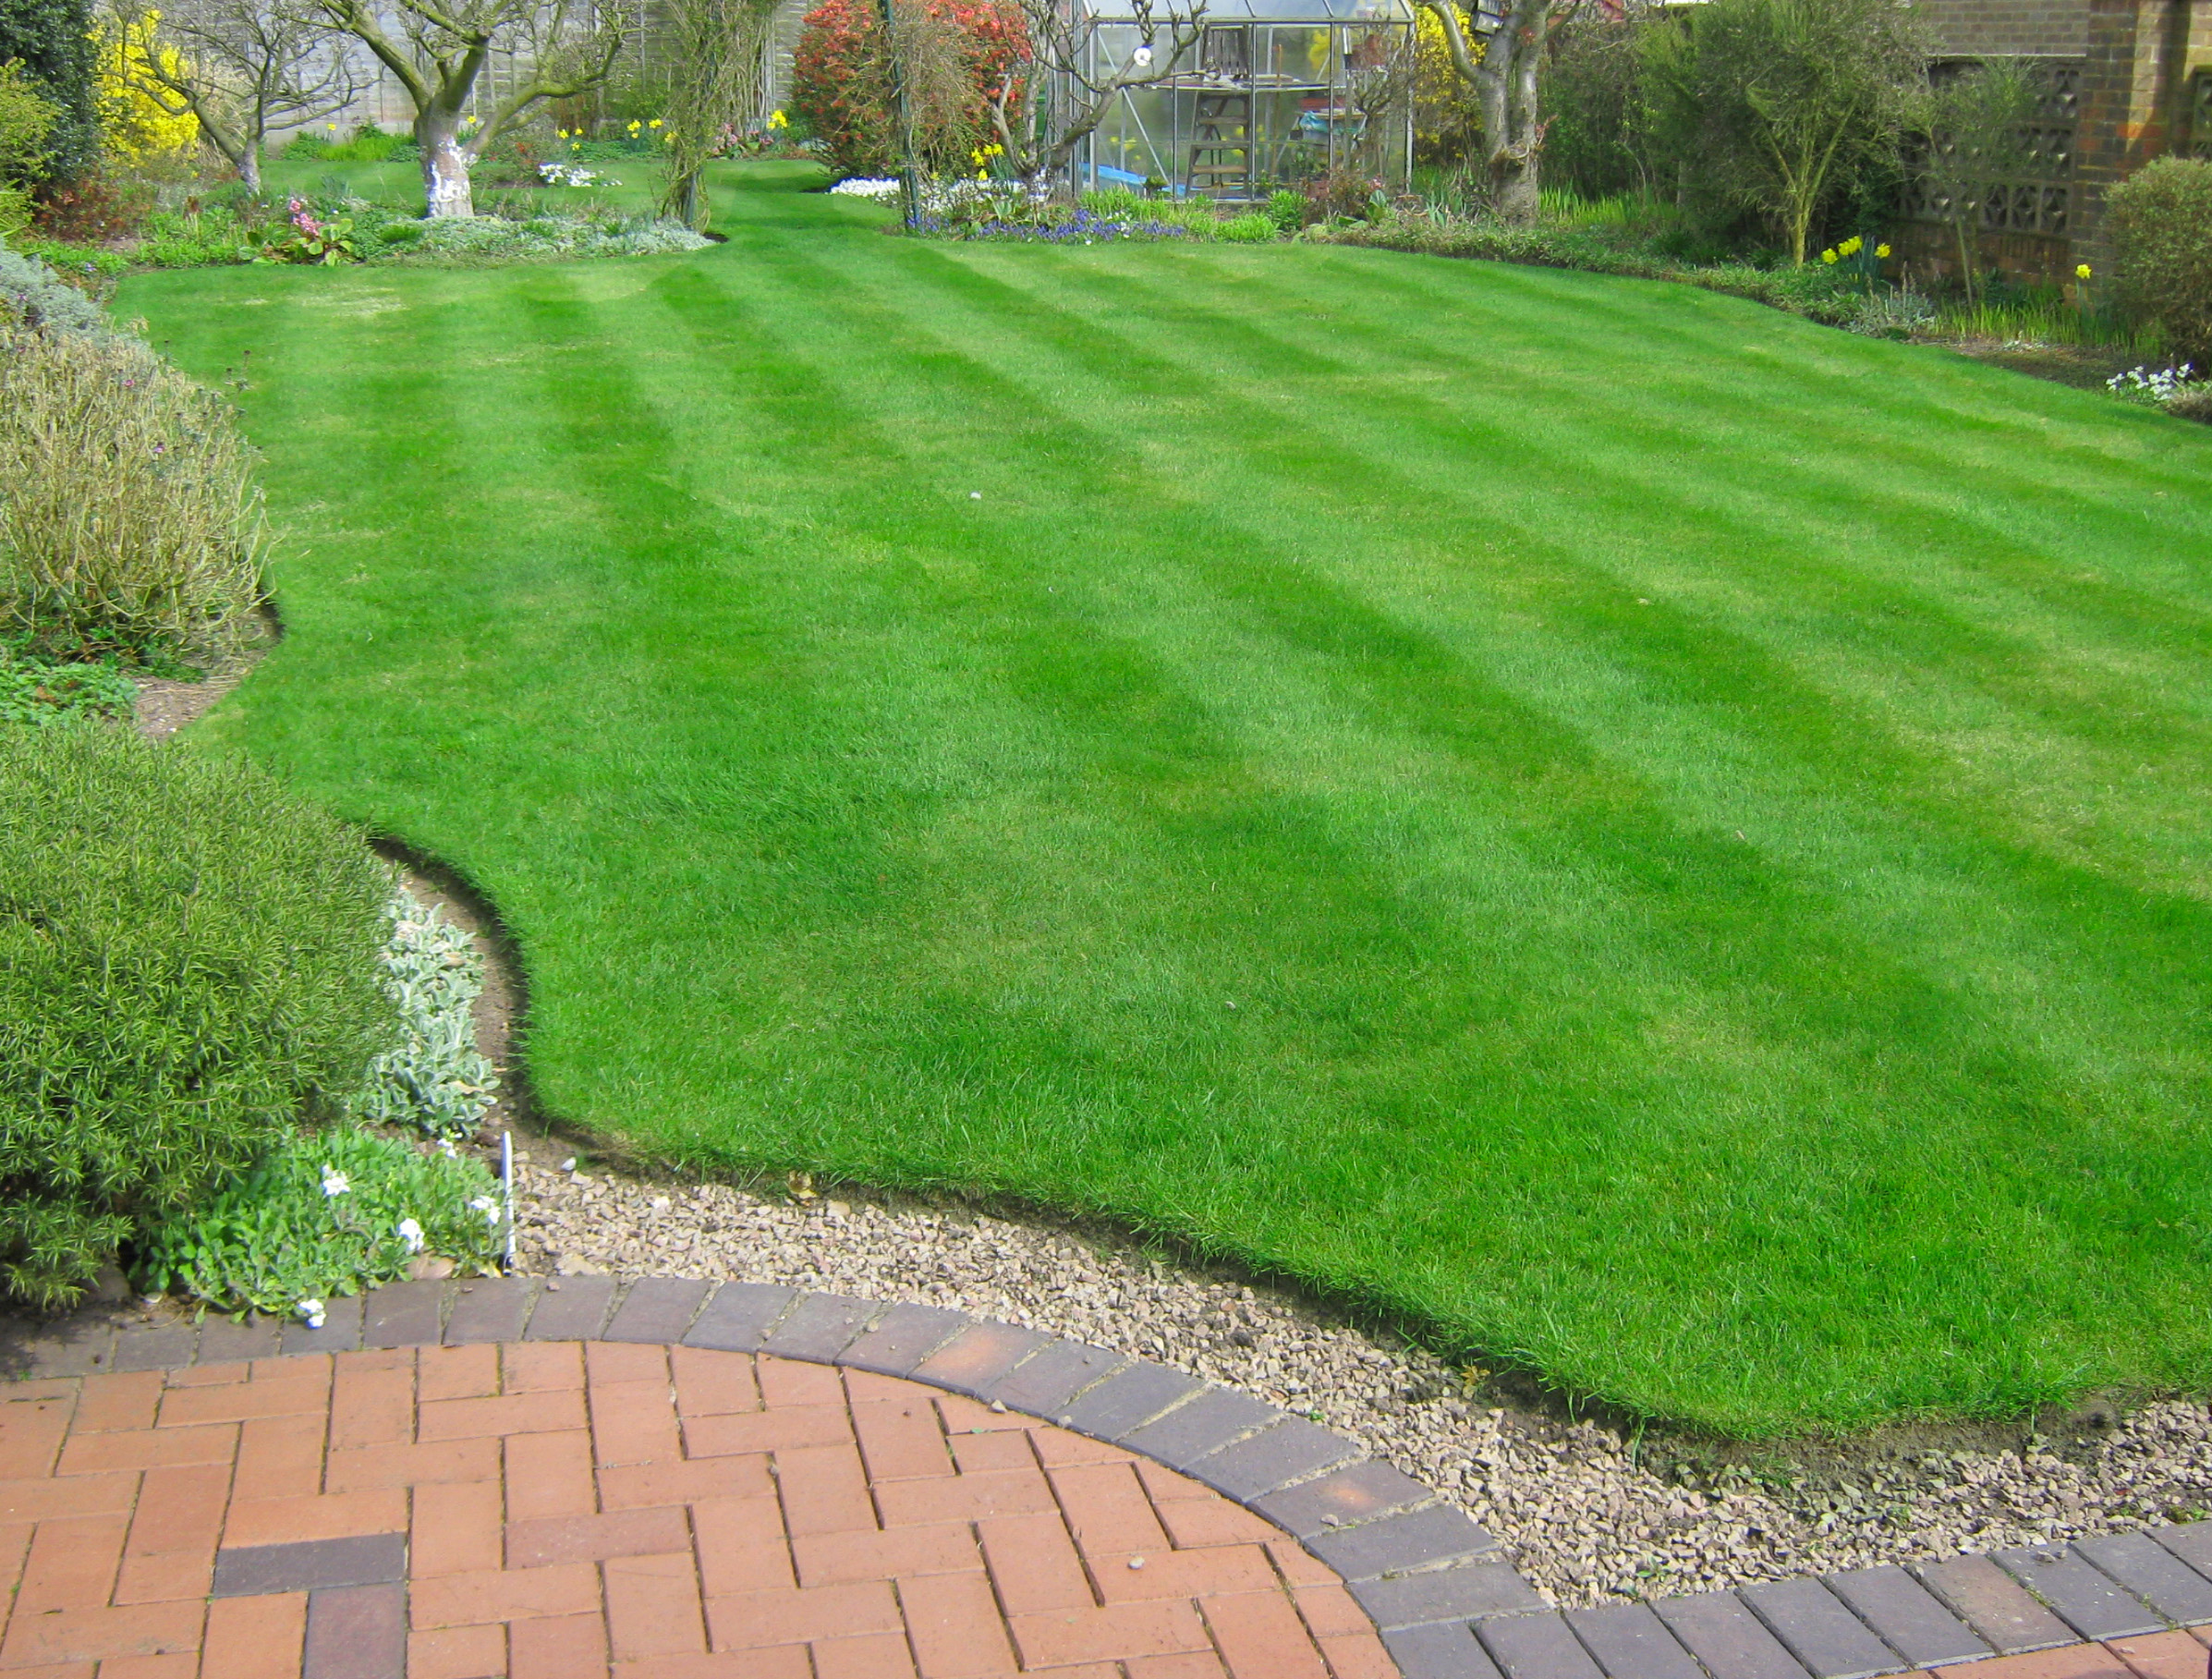 Who is the Best Lawn Treatment Company?